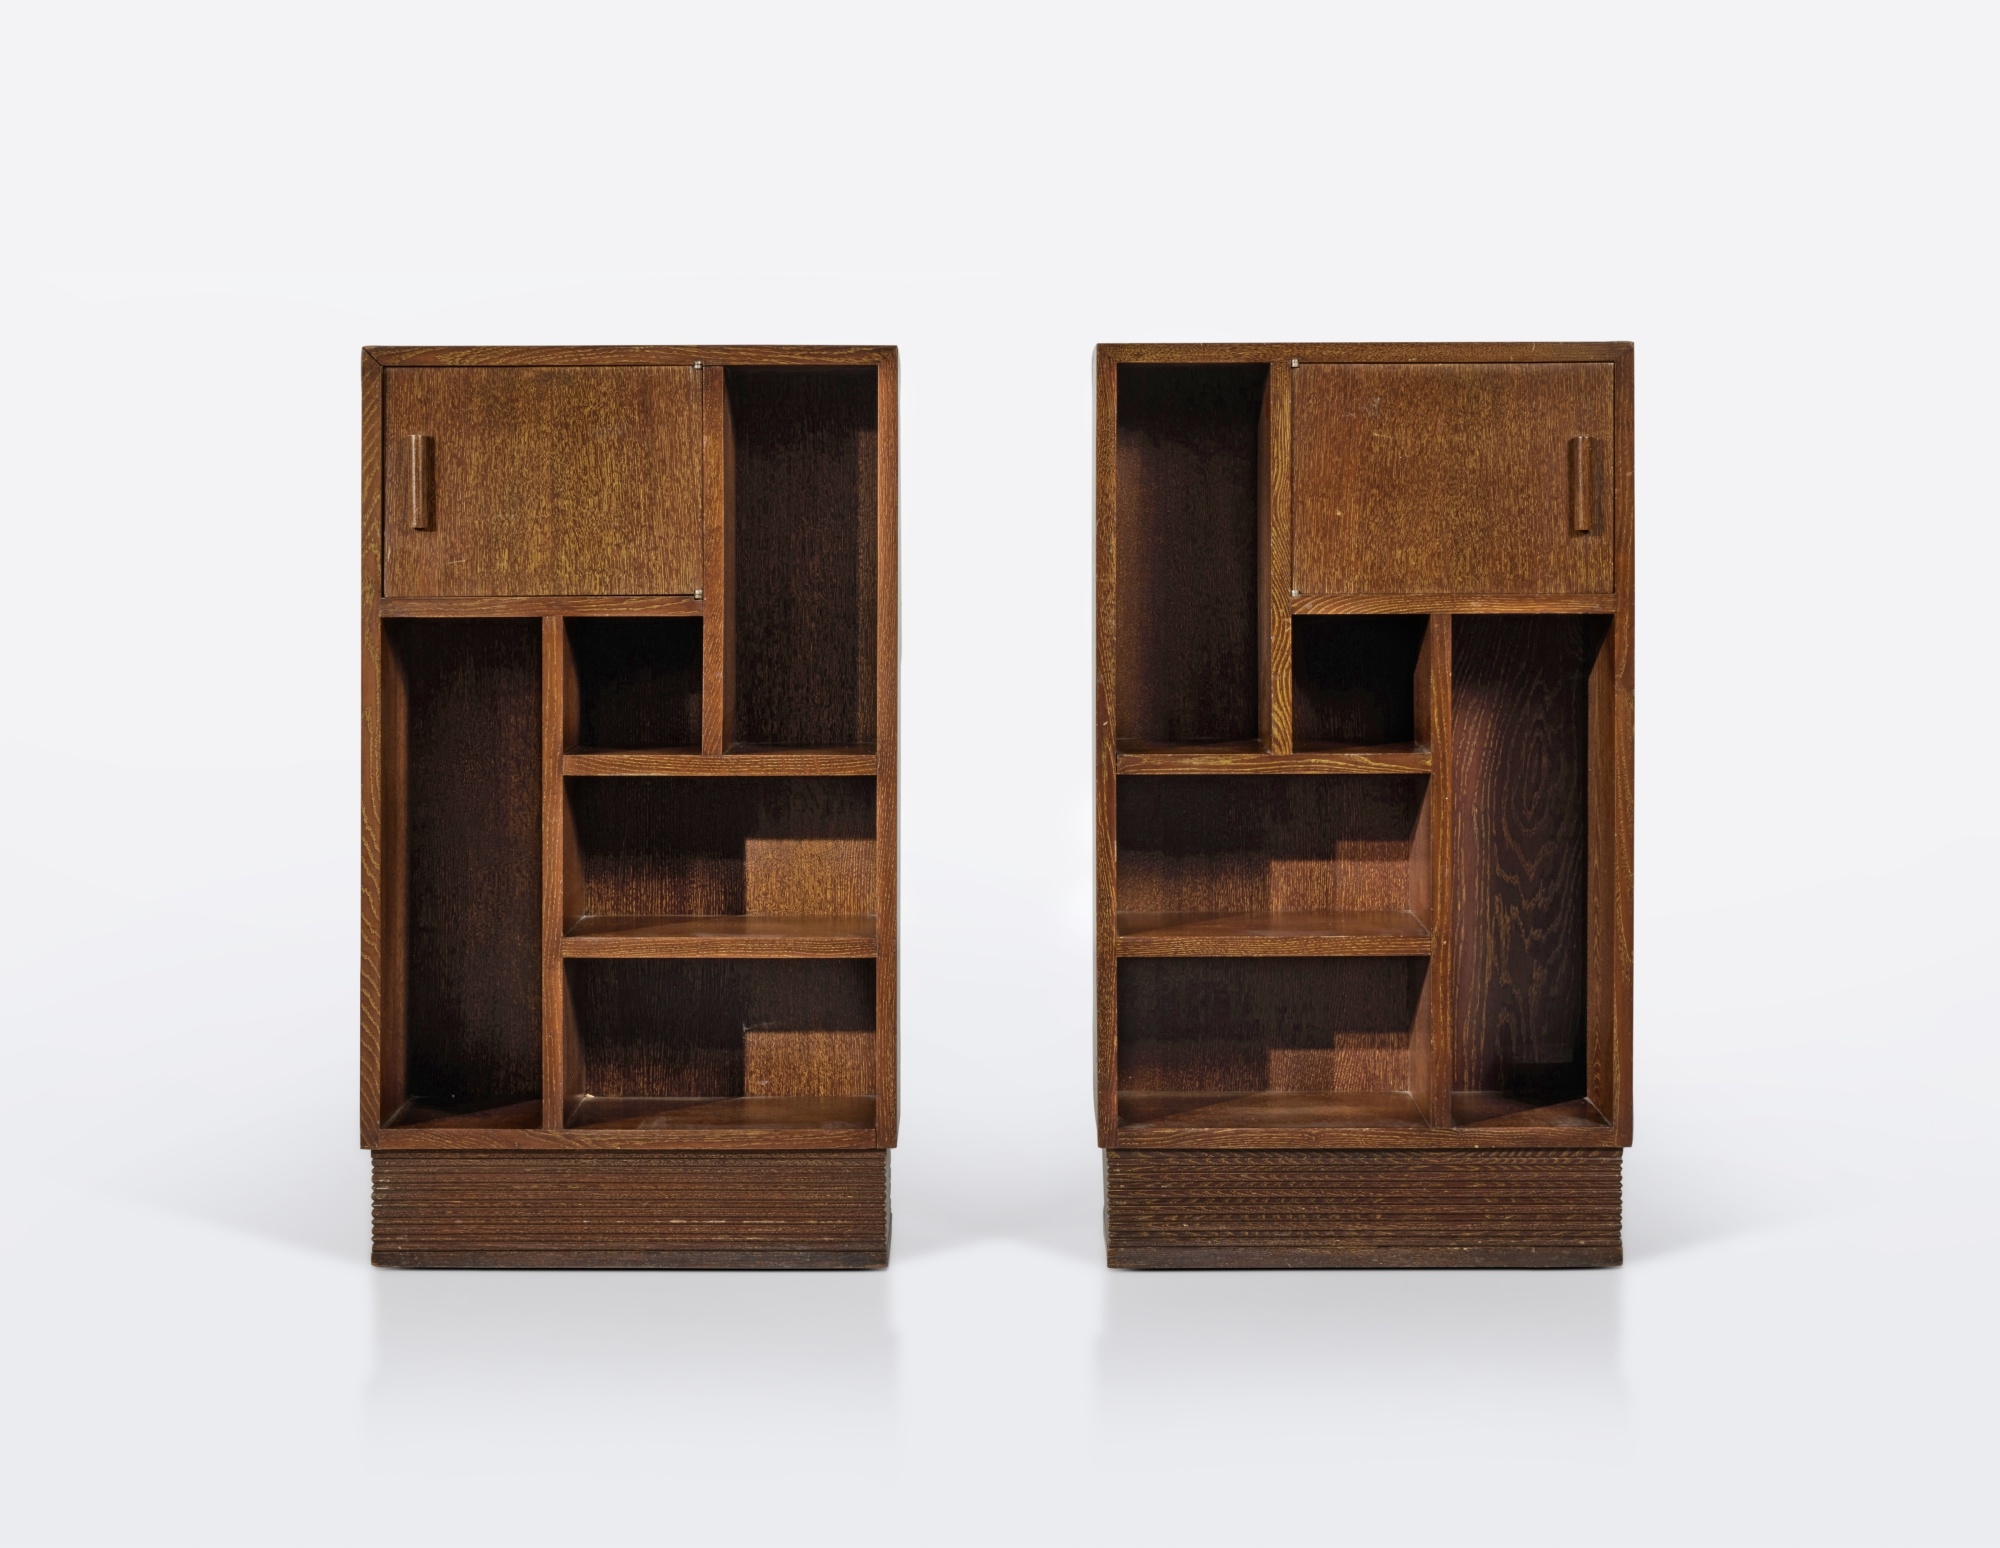 Artwork by Pierre Legrain, Pair of Bookcases, Made of cerused oak